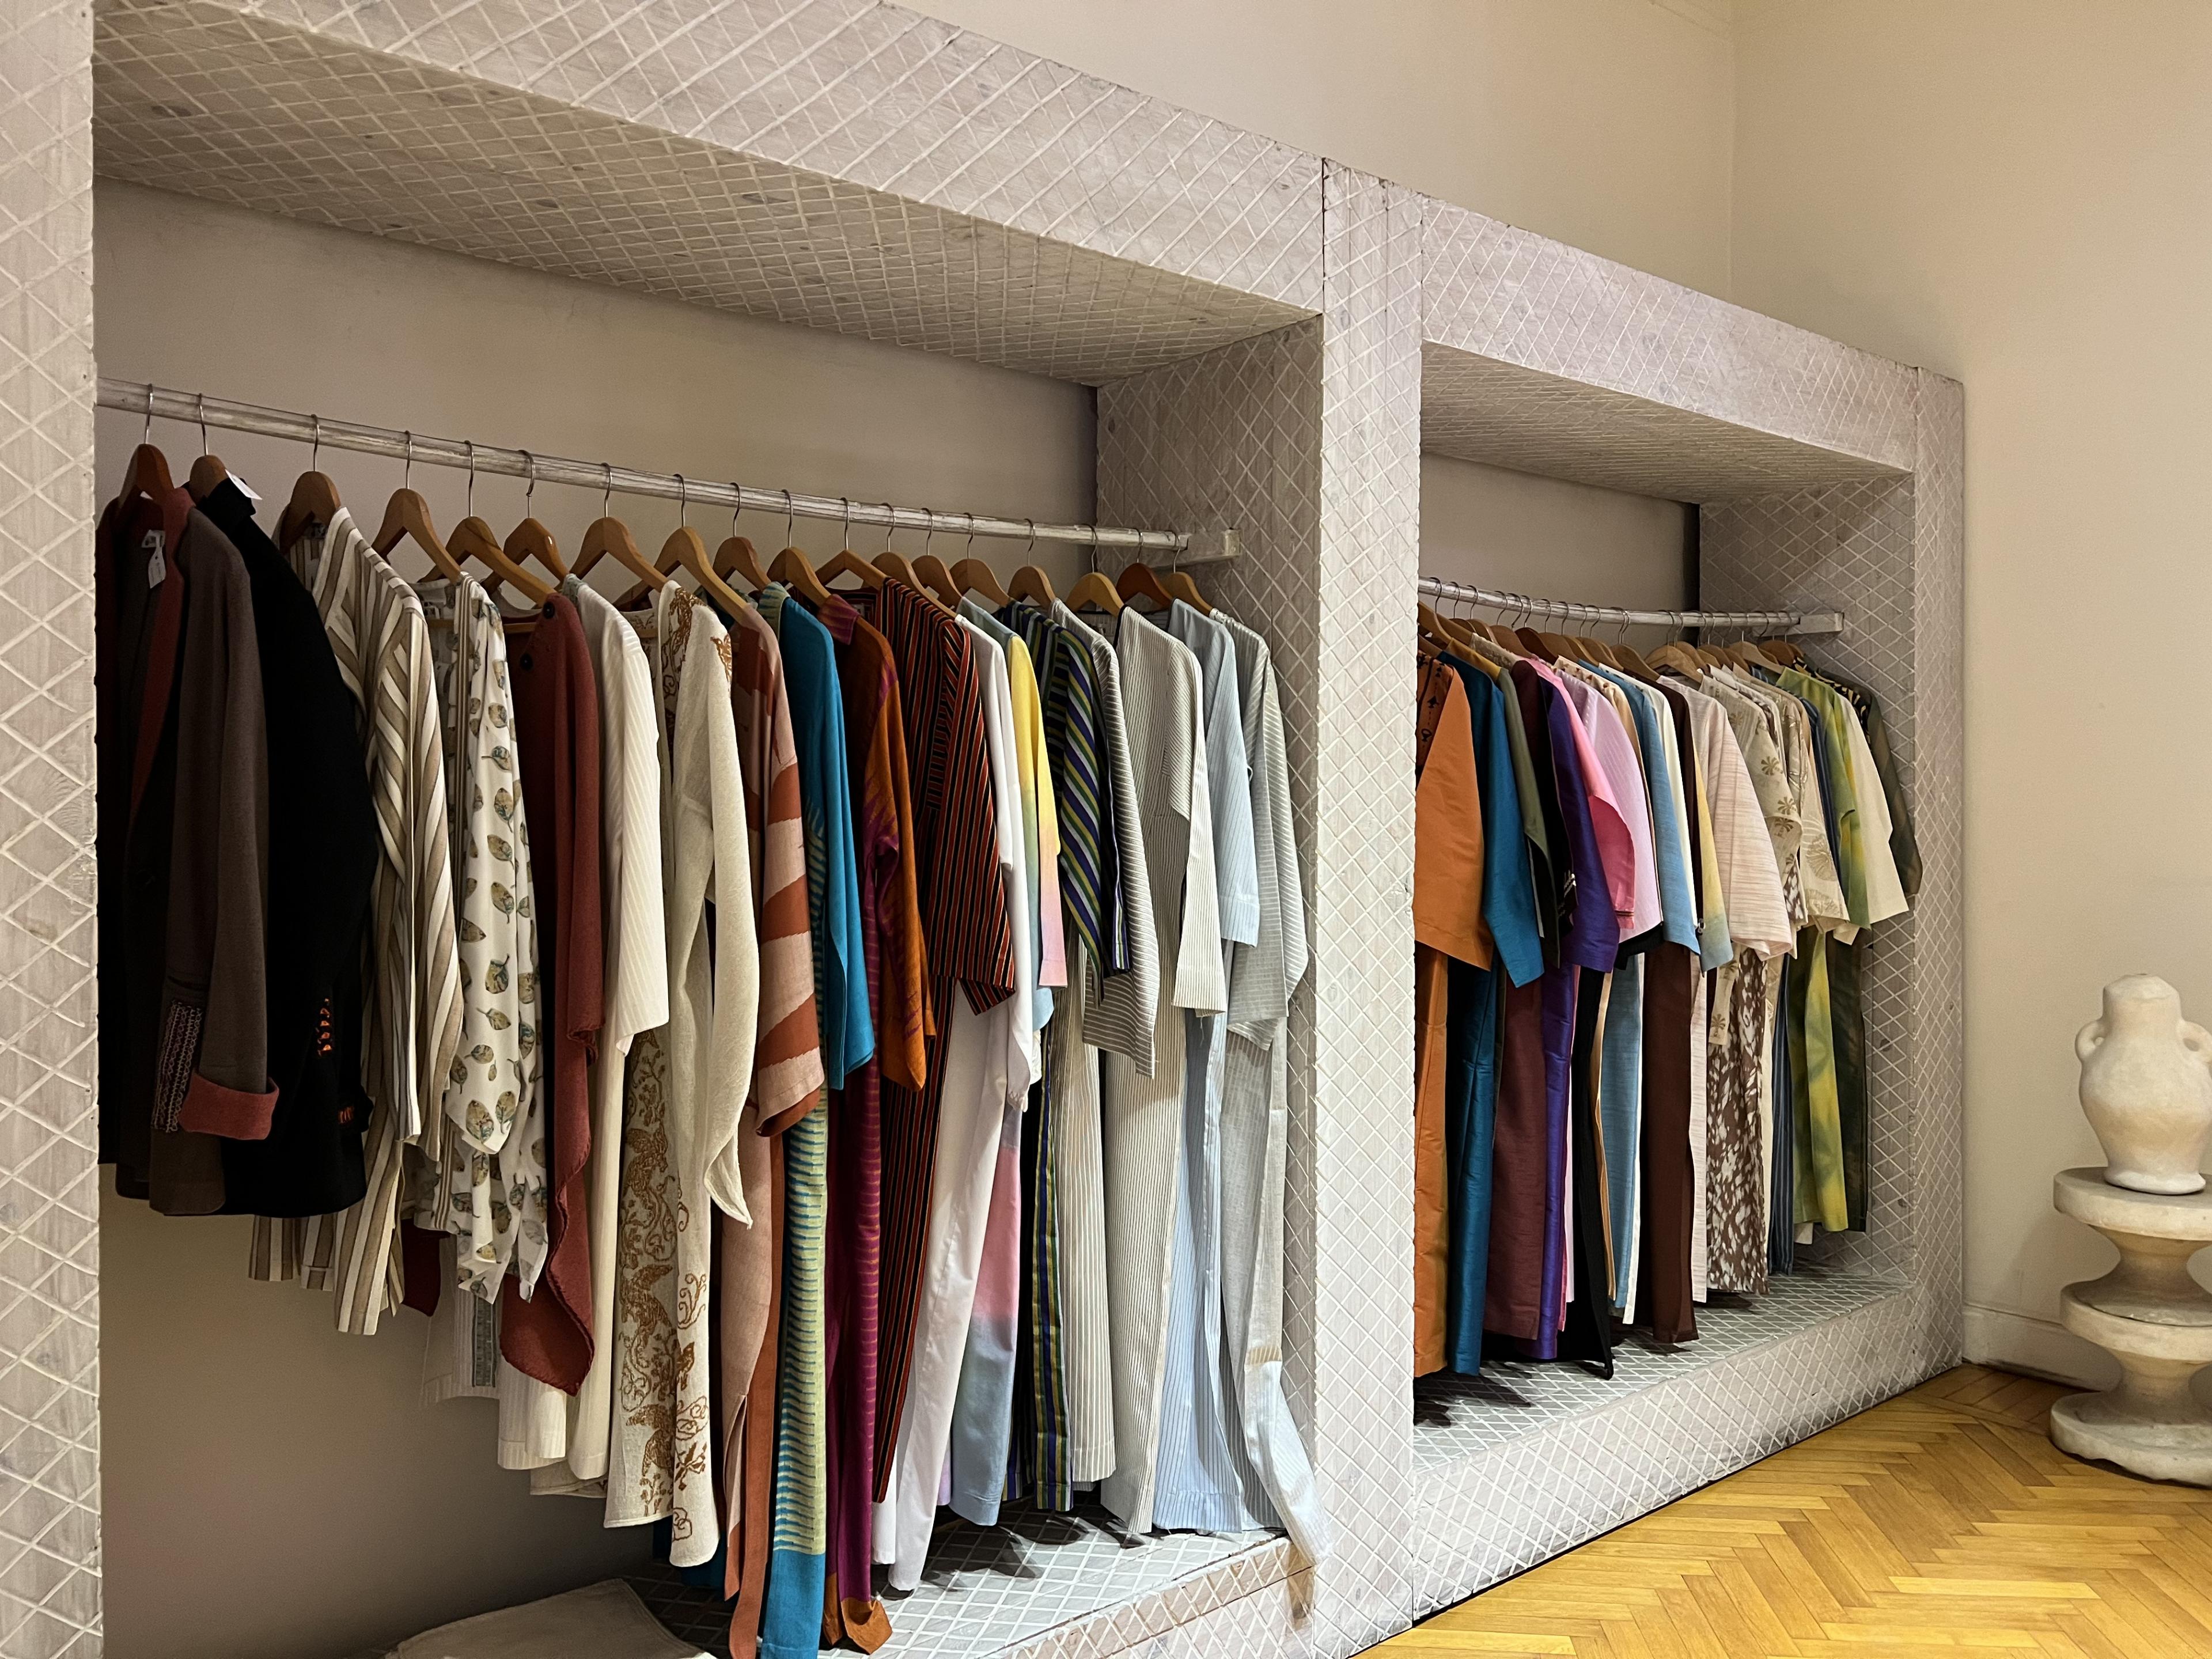 Two clothing racks with colorful shirts and dresses along the racks 